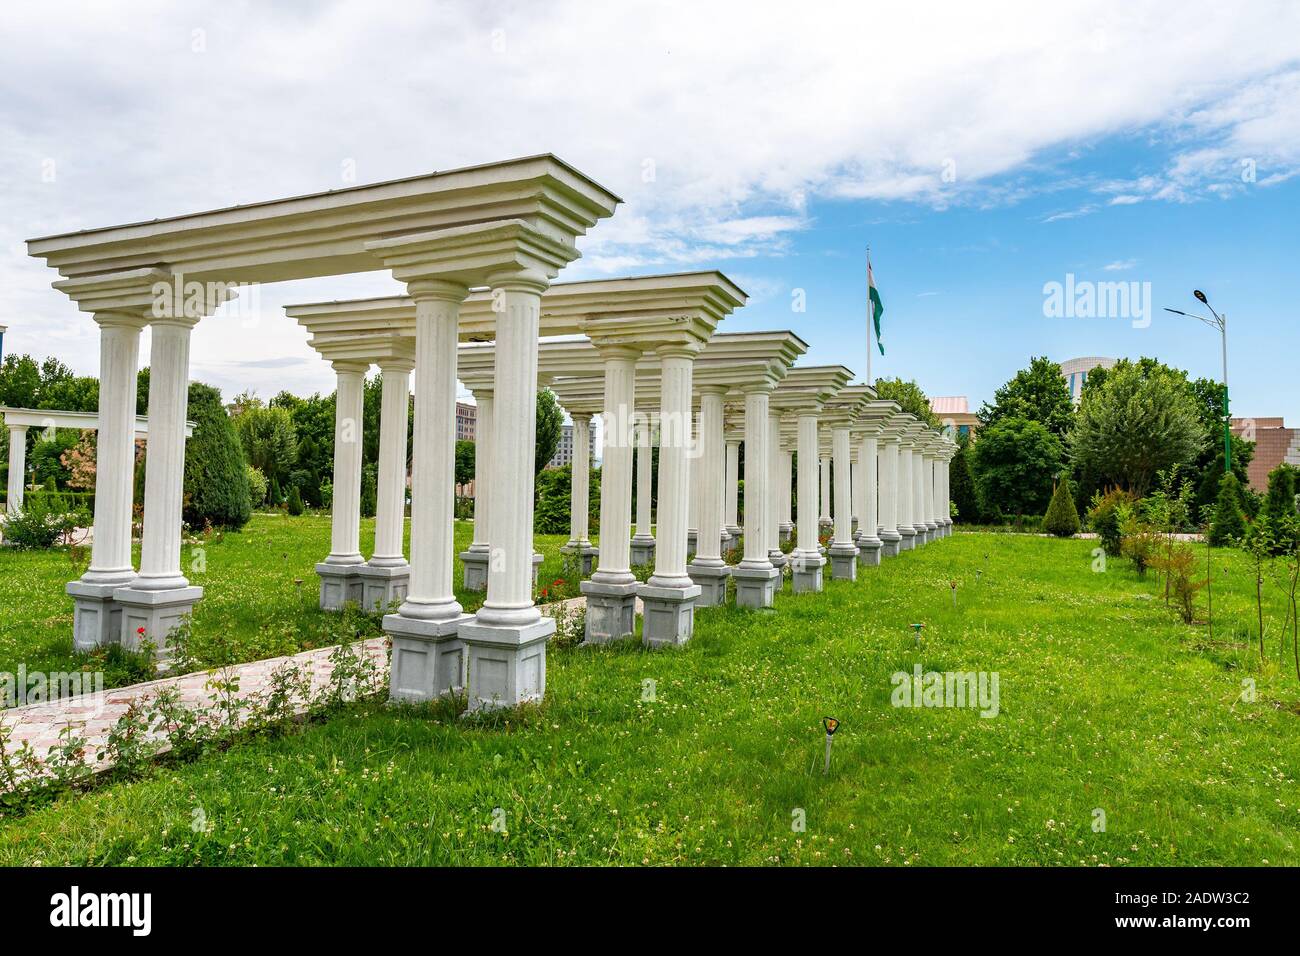 Dushanbe Amphitheater Park Picturesque Garden View at Ismoil Somoni Avenue on a Cloudy Rainy Sky Day Stock Photo